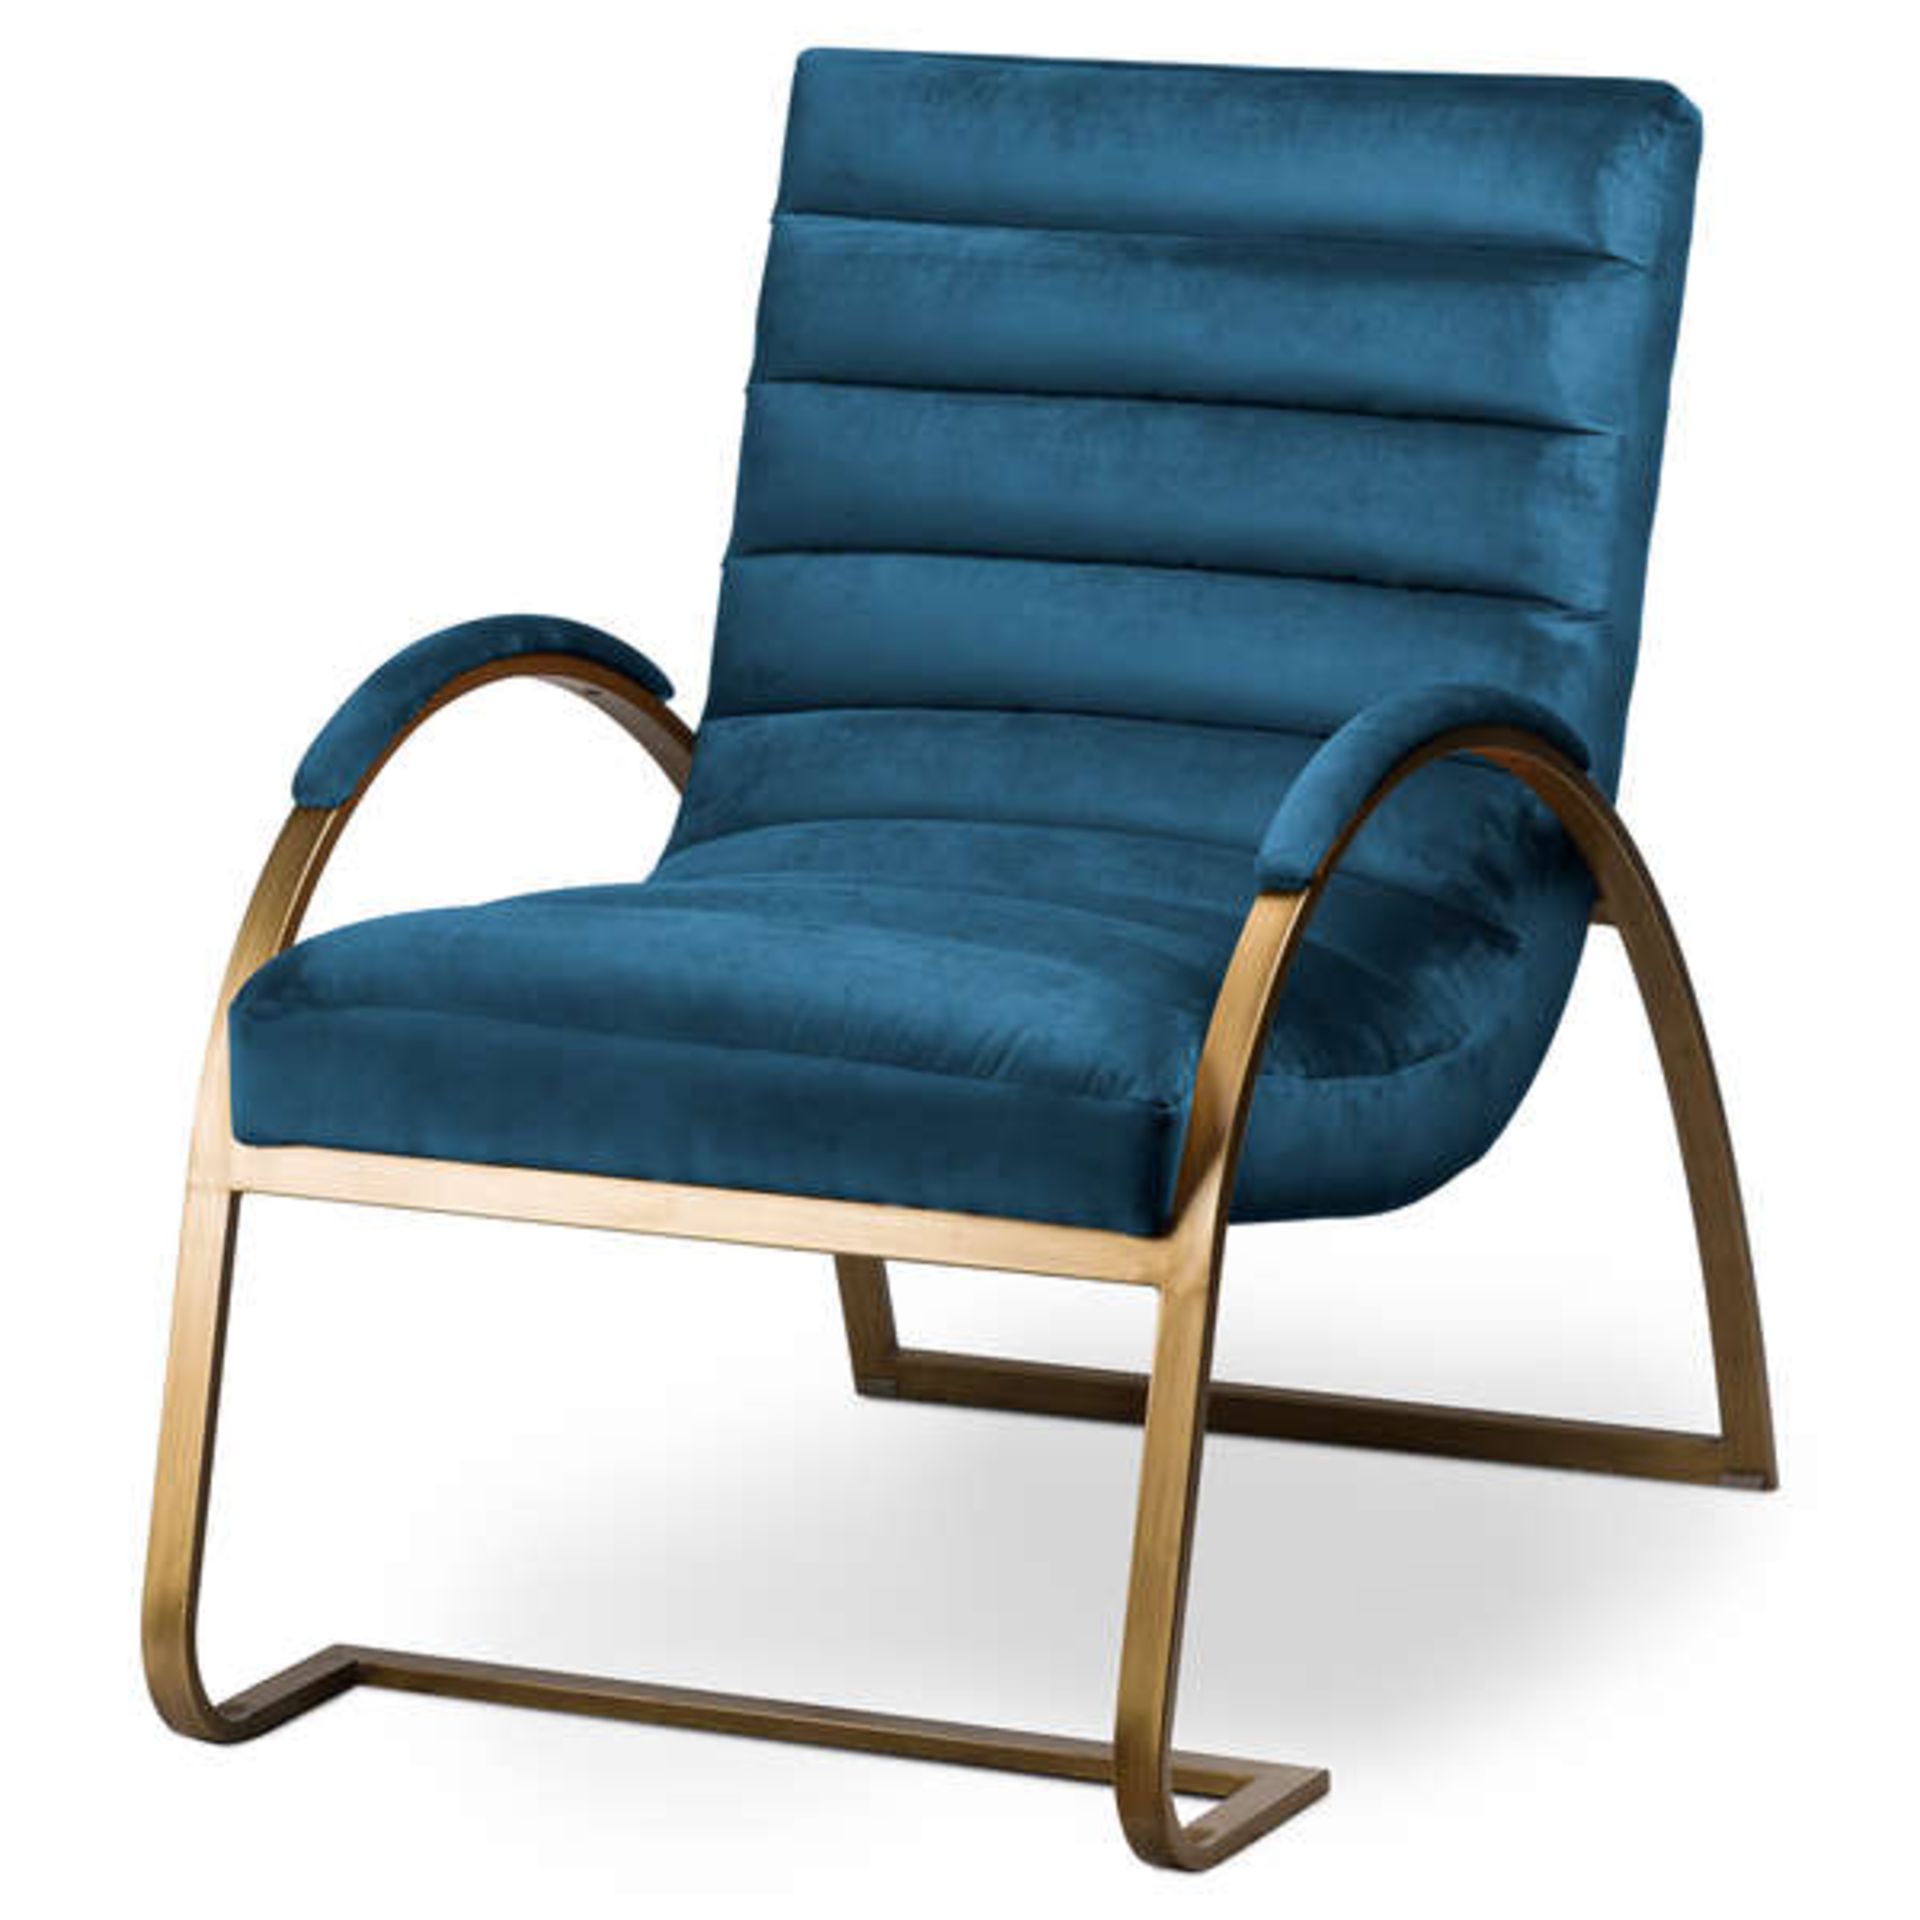 Arc Chair Oxford Navy Blue Velvet and Brass Ribbed Ark Chair curate a stylish yet comfortable - Image 2 of 5